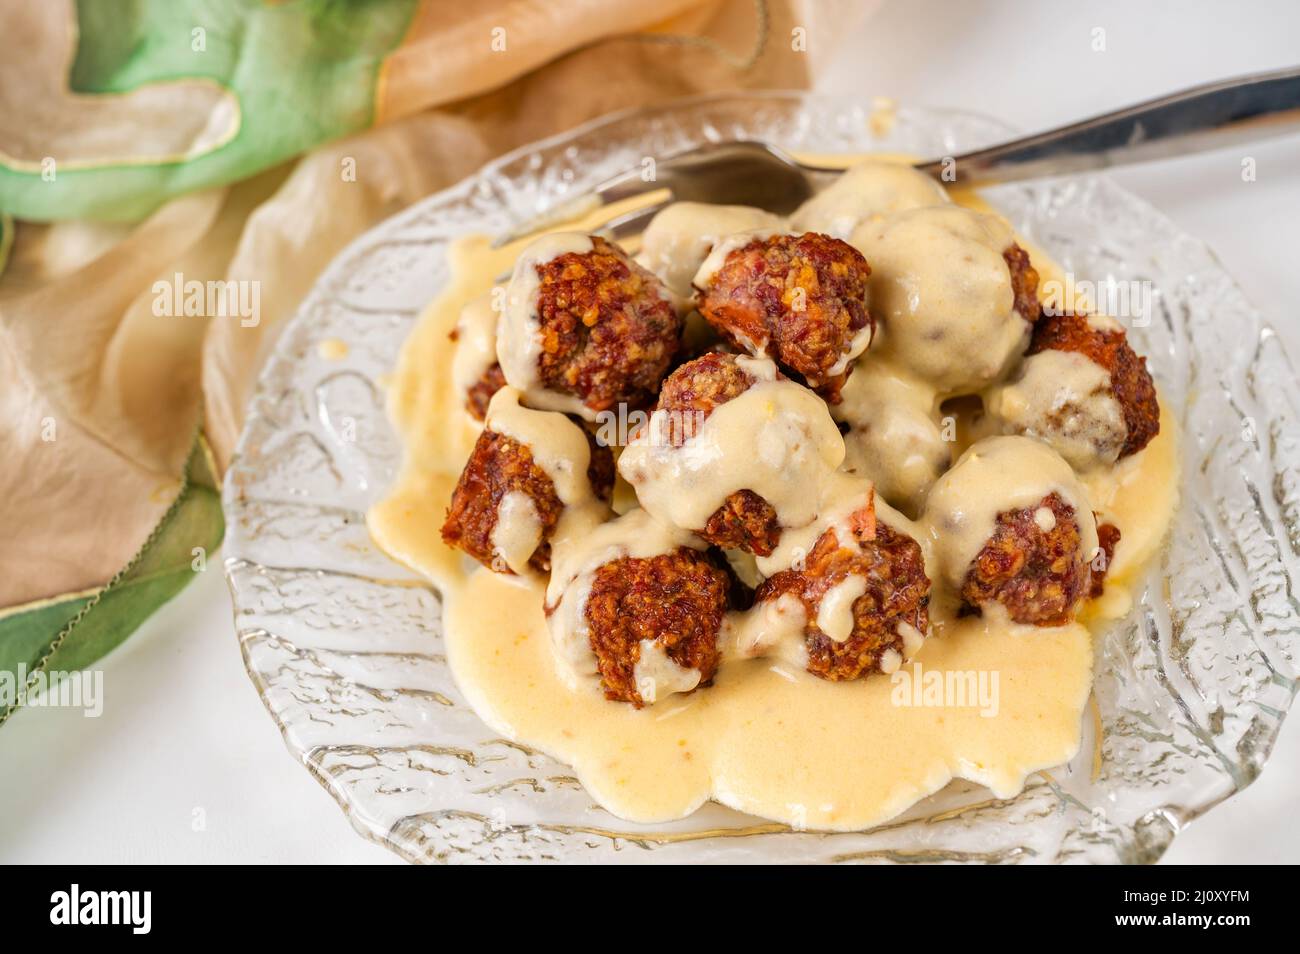 Fried meat ball with cheese and lemon sauce on glass plate, fork and green scarf, closeup. Stock Photo